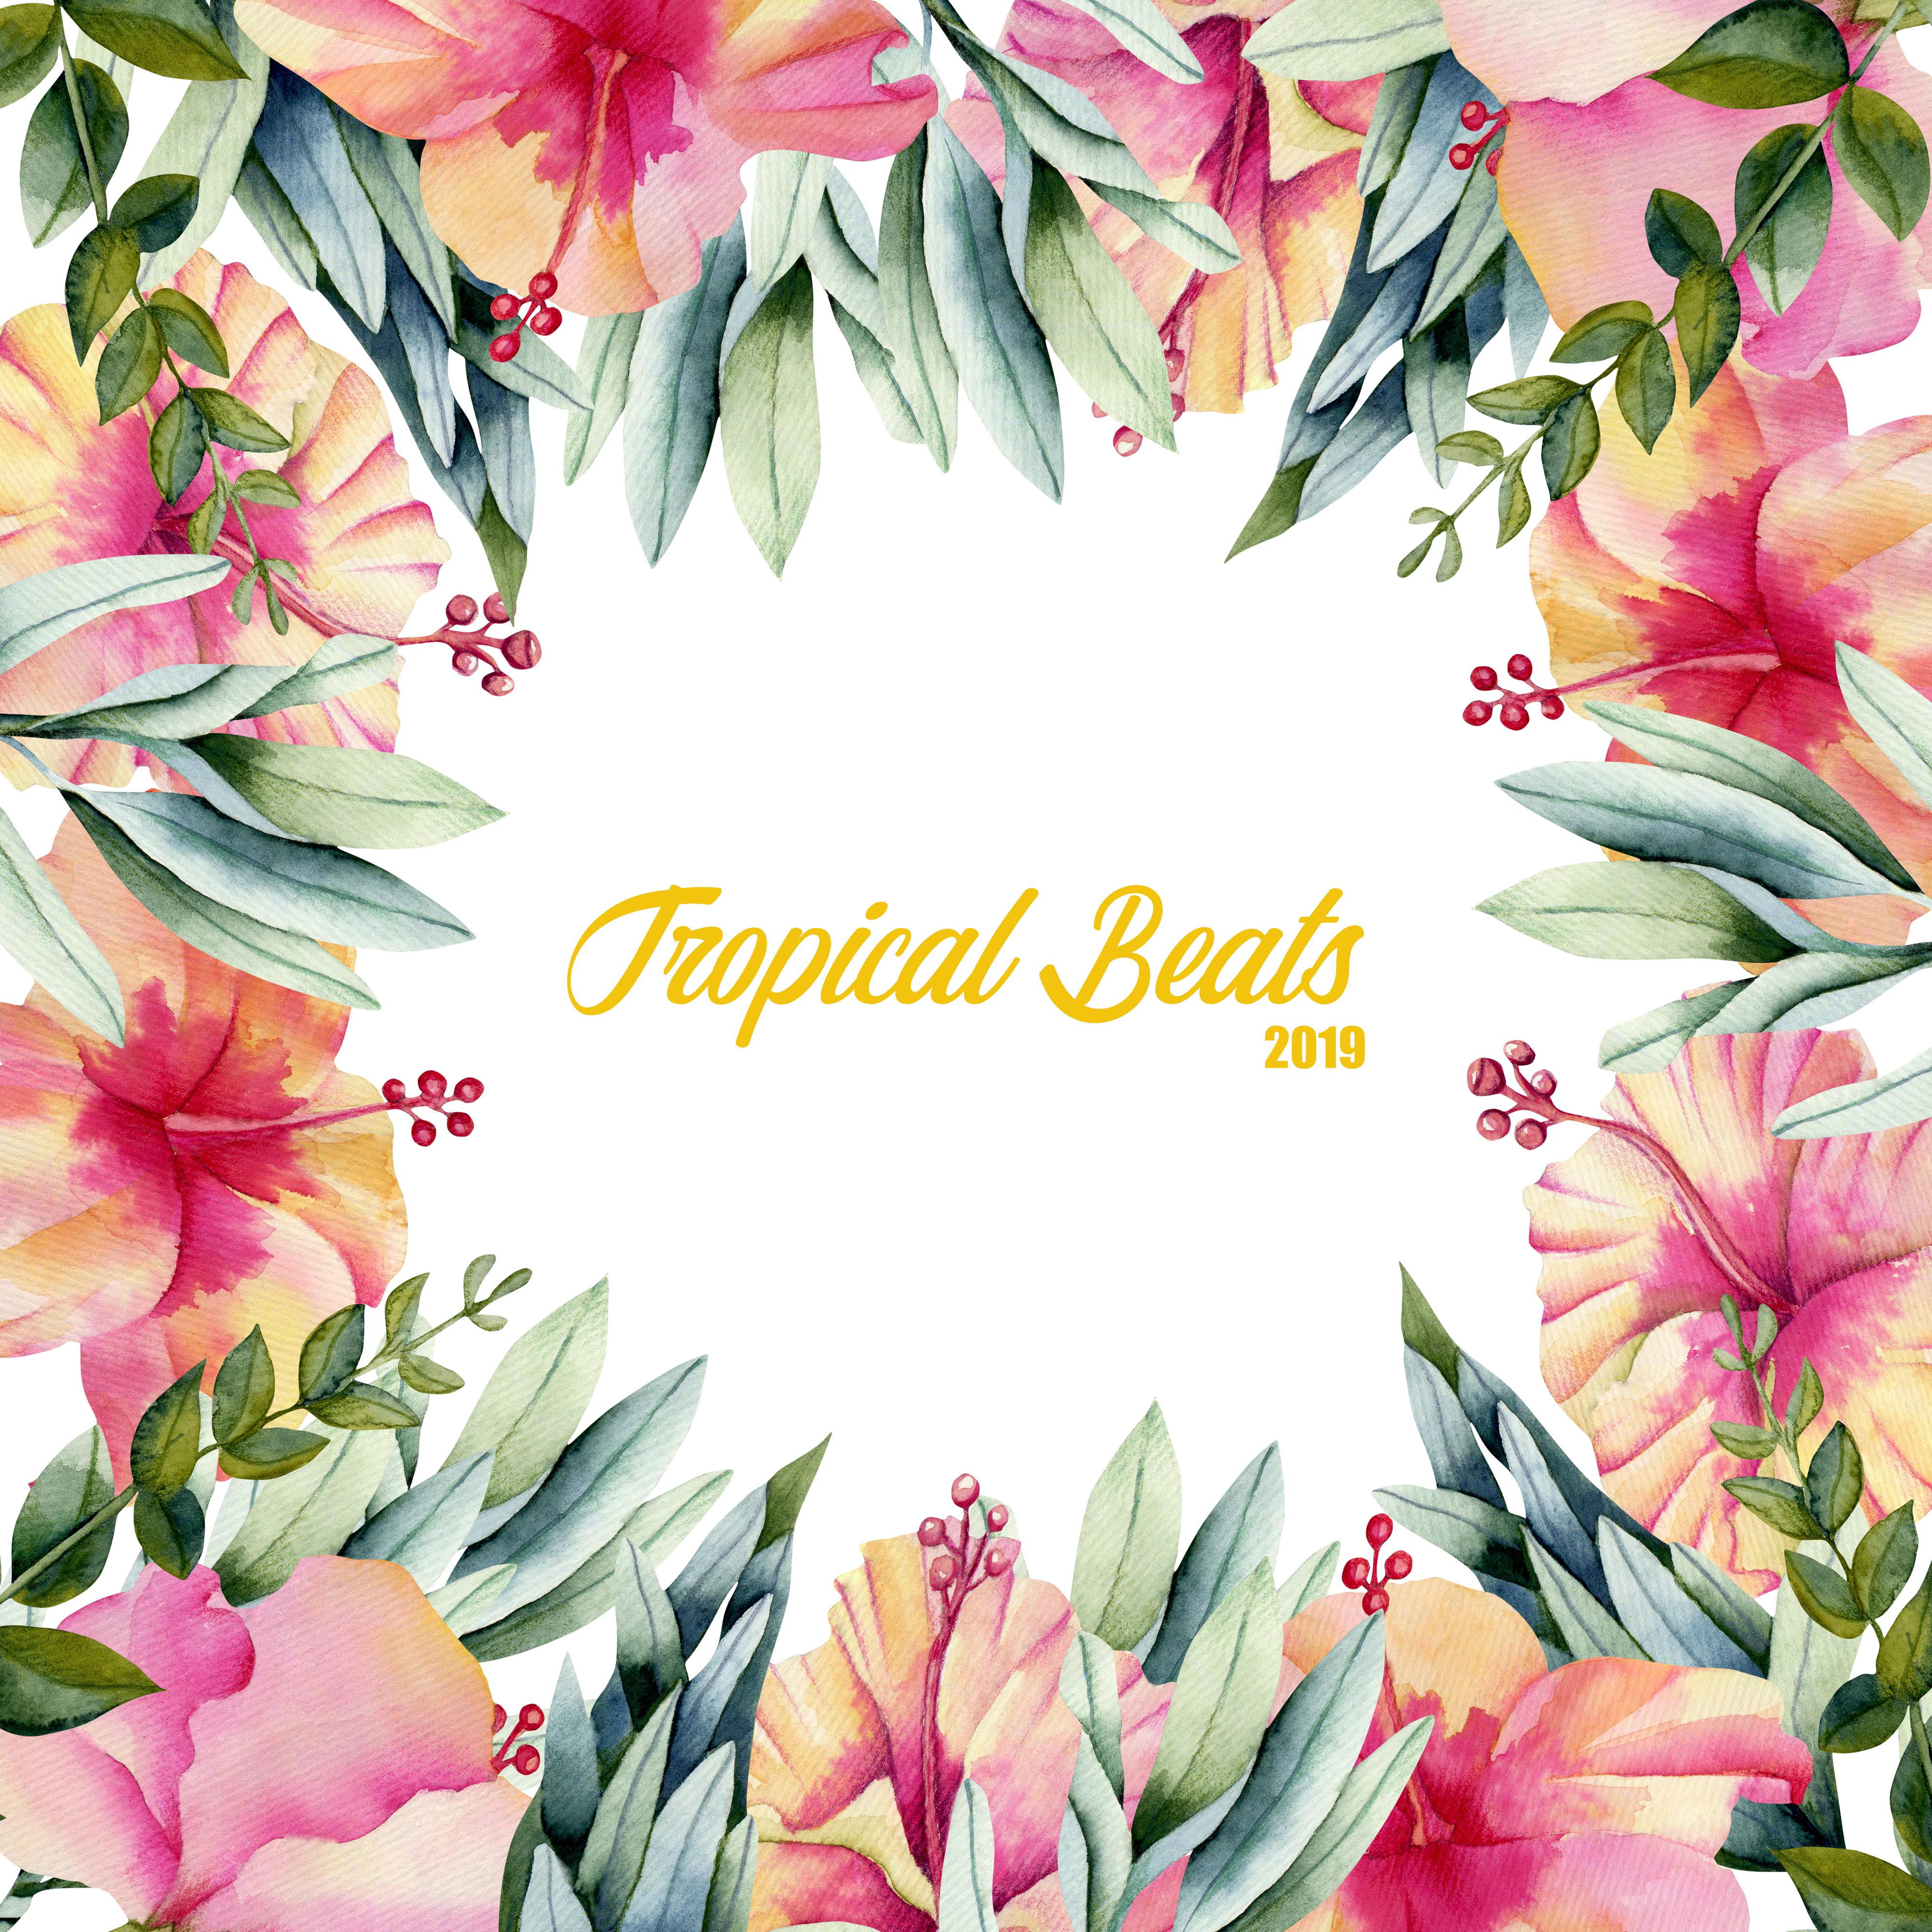 Tropical Beats 2019: Chill Paradise, Summer Music 2019, Holiday Music & Relax, Modern Songs, Deep Relaxation